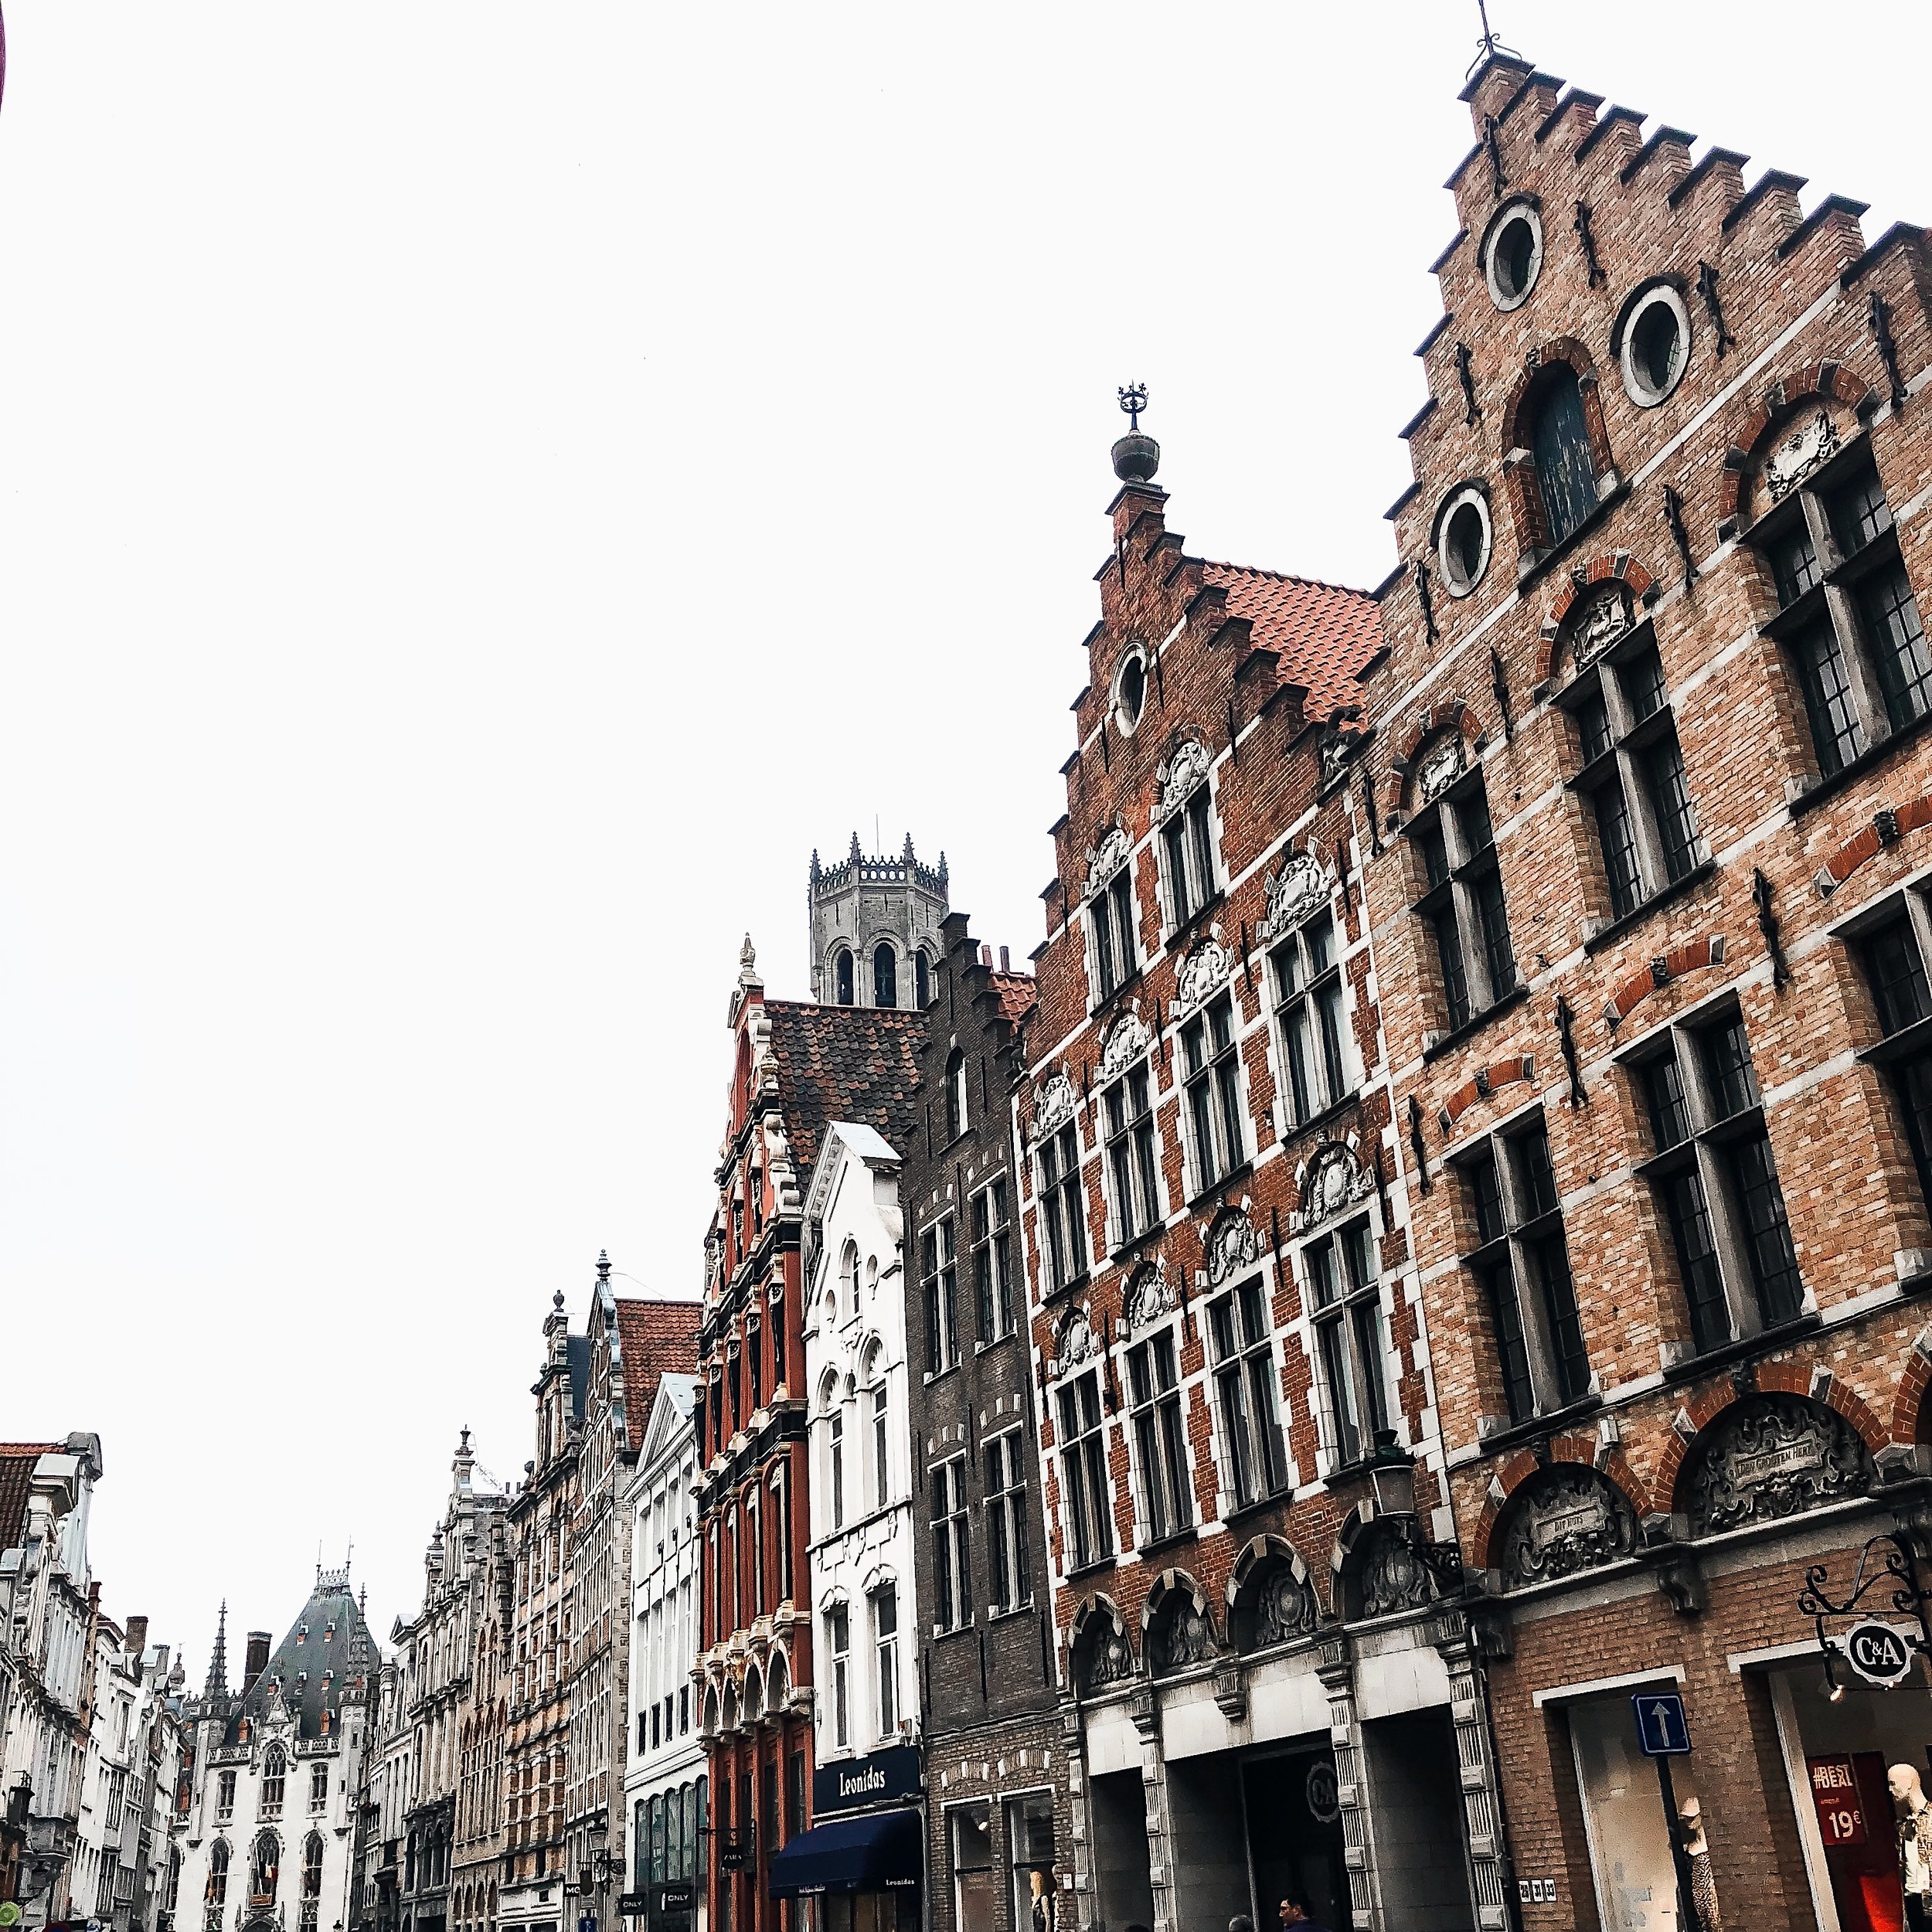 Belgium Travel Guide Bruges Ghent In 4 Days Esther Santer Fashion Blog NYC Street Style Blogger Outfit Sight Seeing Tourist Shop What How To Wear Expore What To Do Vacatiom Itinerary Short Stopover Layover Europe EuroTrip Summer Activities Suggestions.jpg